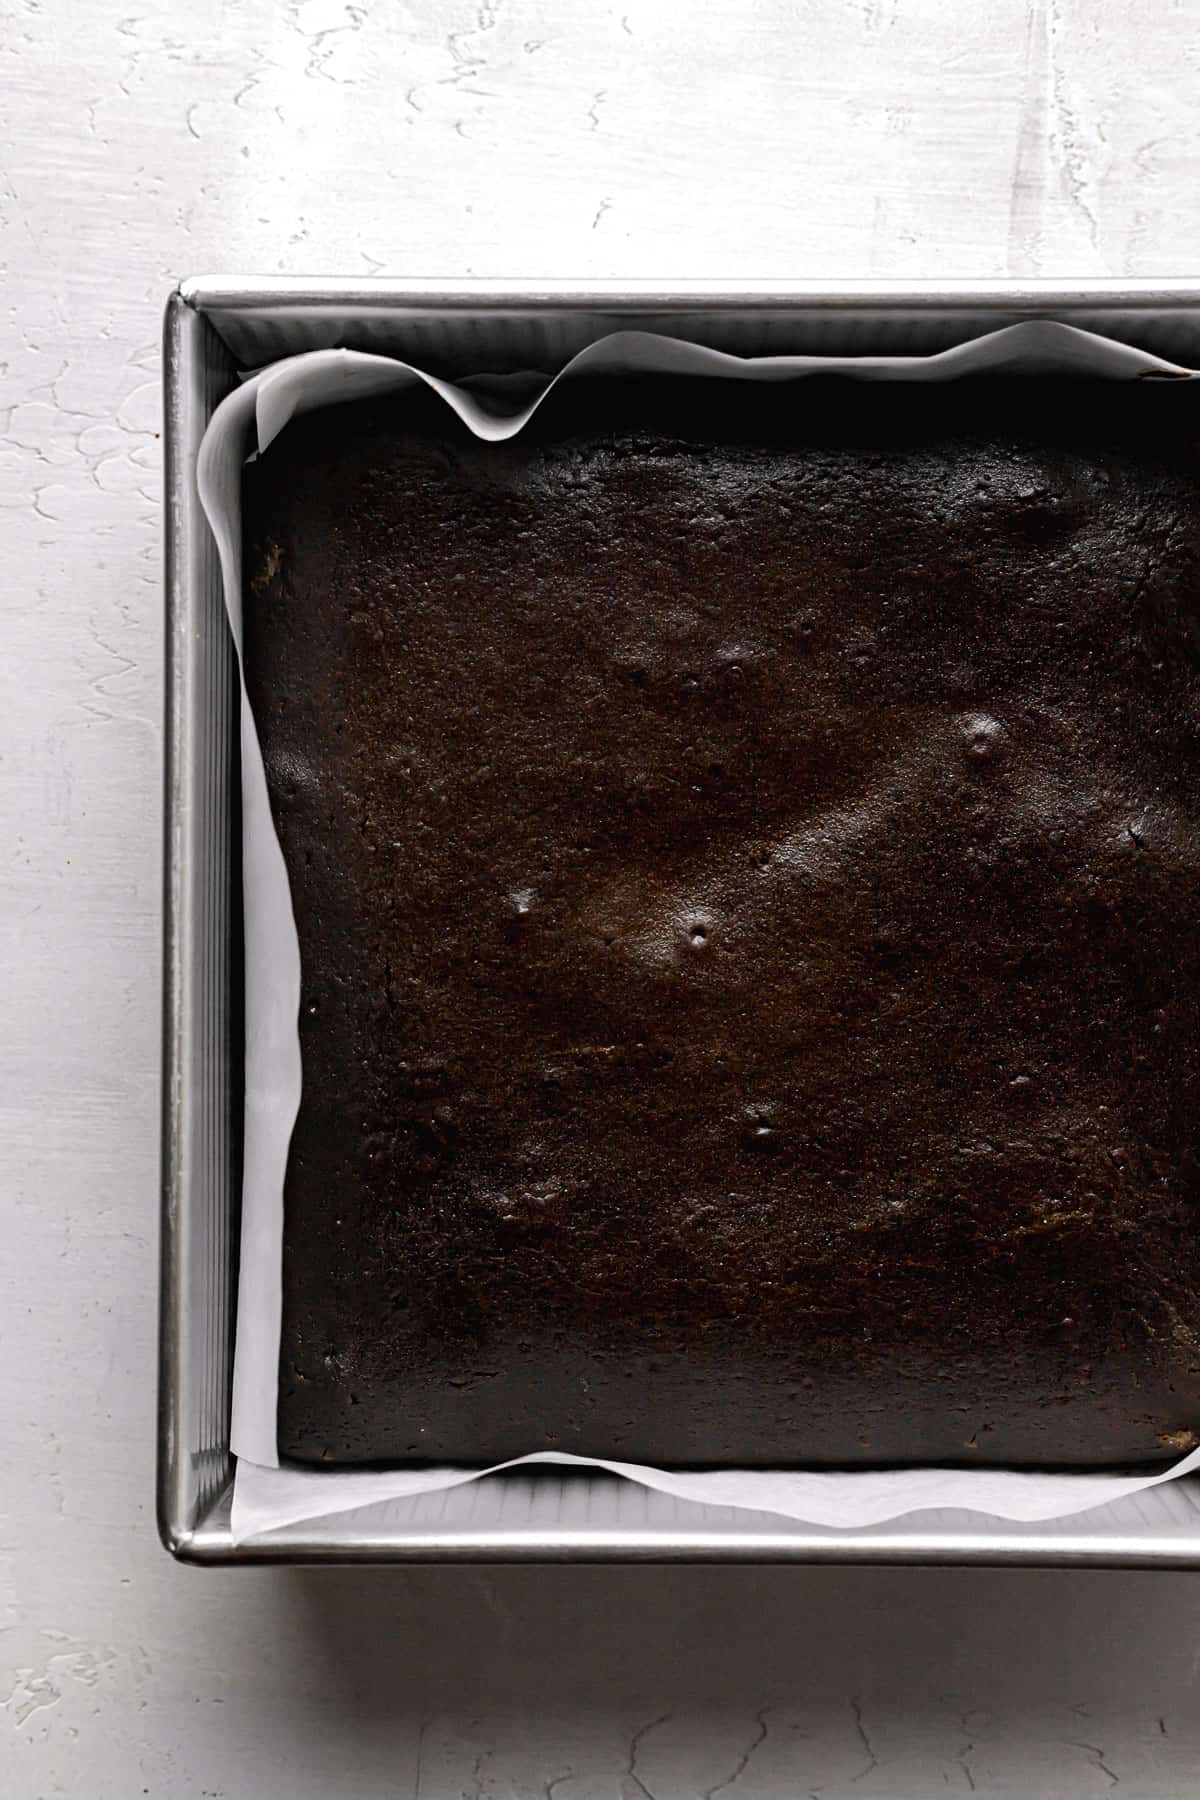 chocolate snack cake baked in square pan.